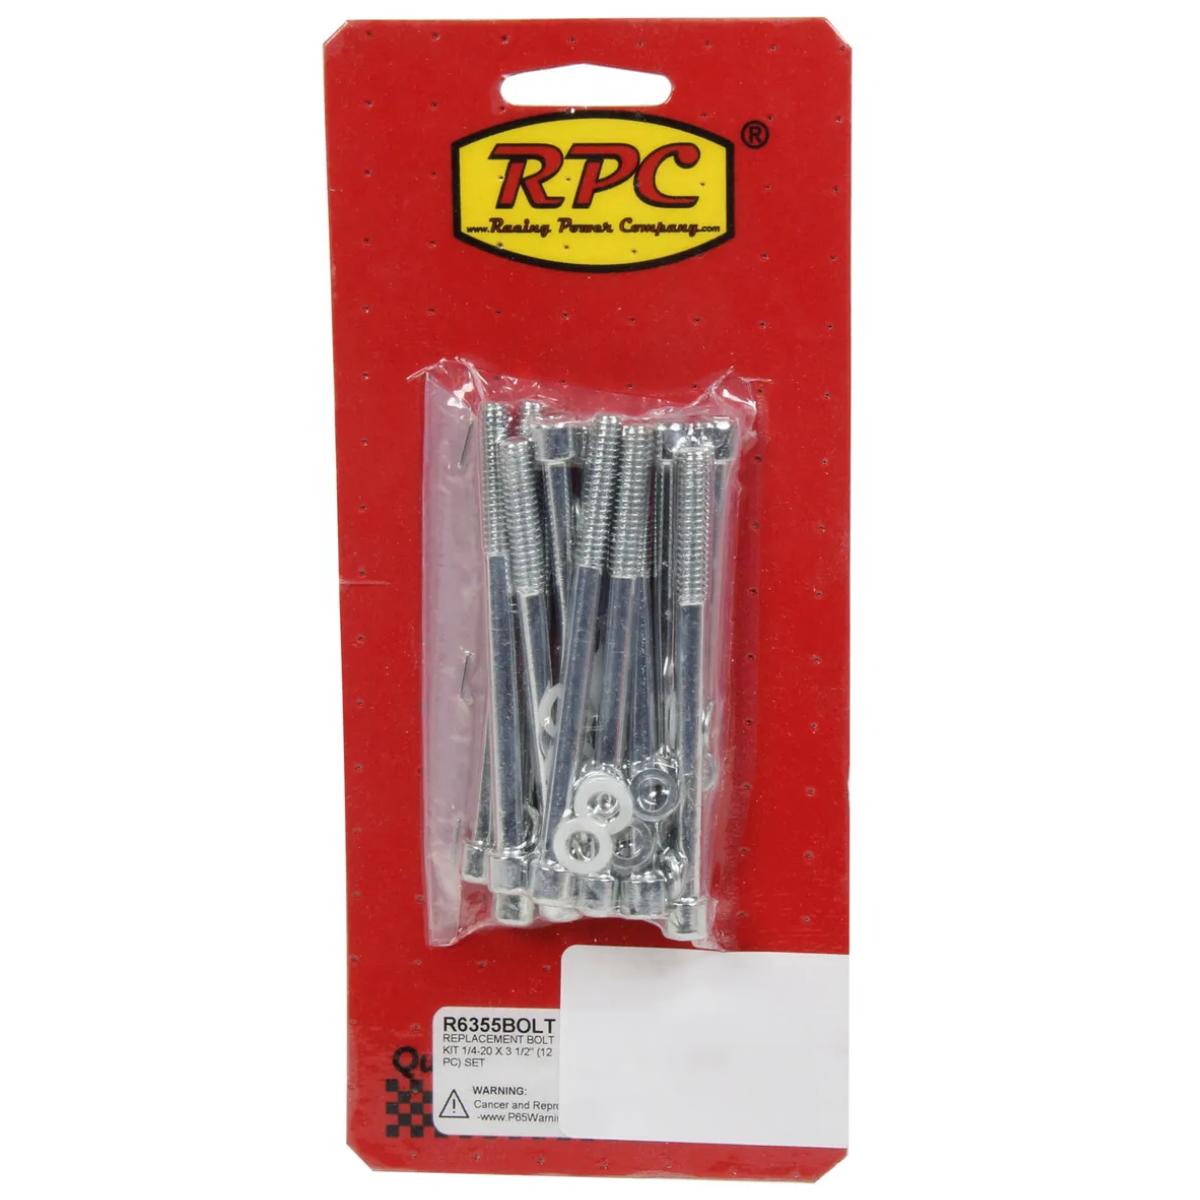 Racing Power Company R6355BOLT Replacement Bolt Kit 1/4-20 X 3 1/2 inch (12 Pc) Set